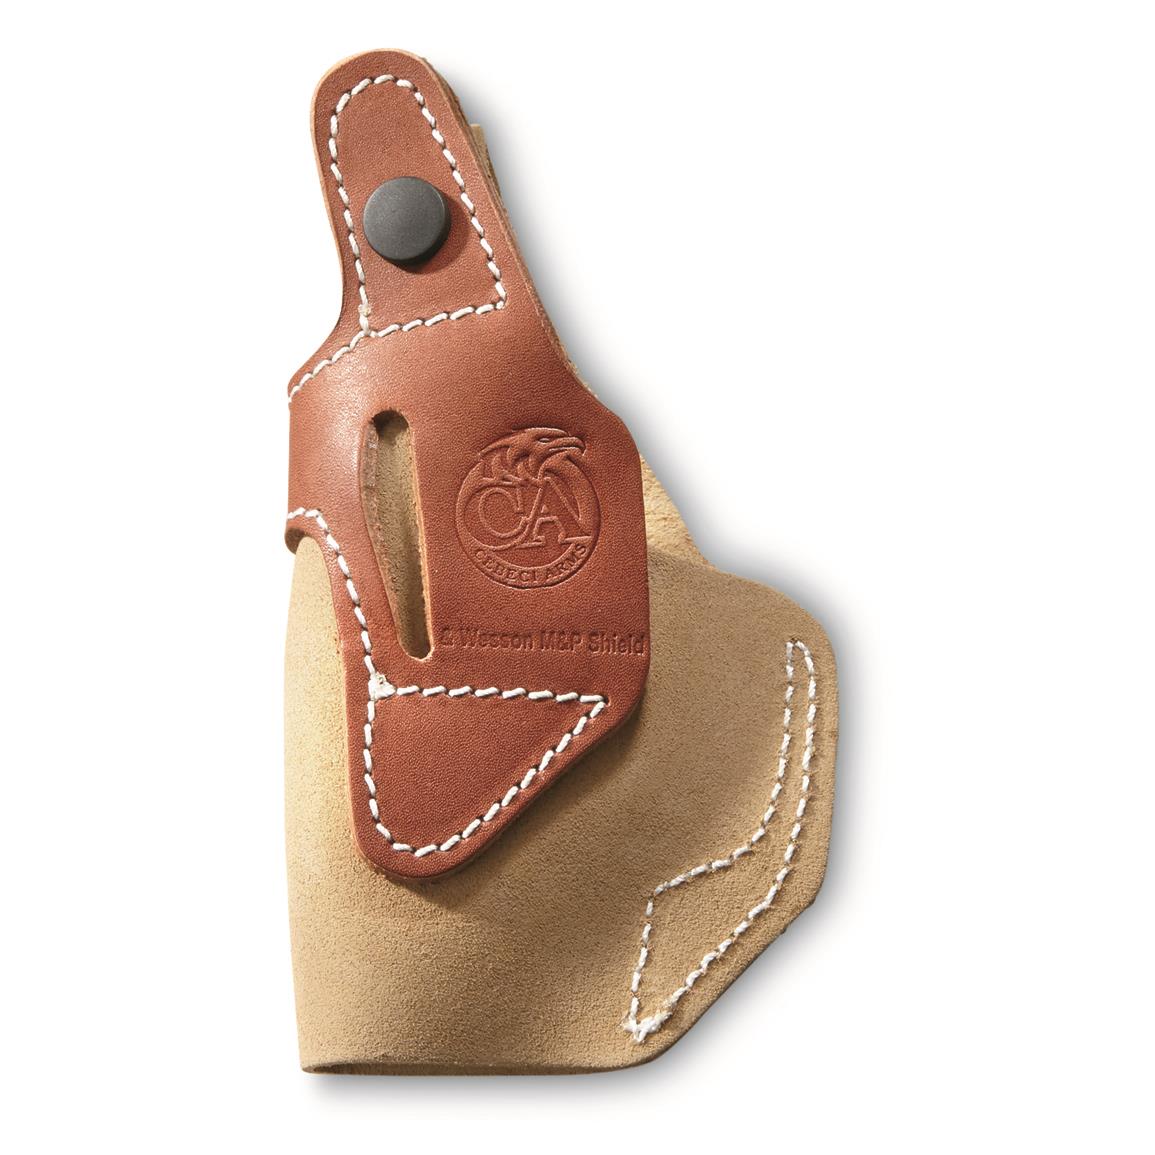 Cebeci Arms Suede IWB Holster, S&W M&P Shield 9mm, Right Hand